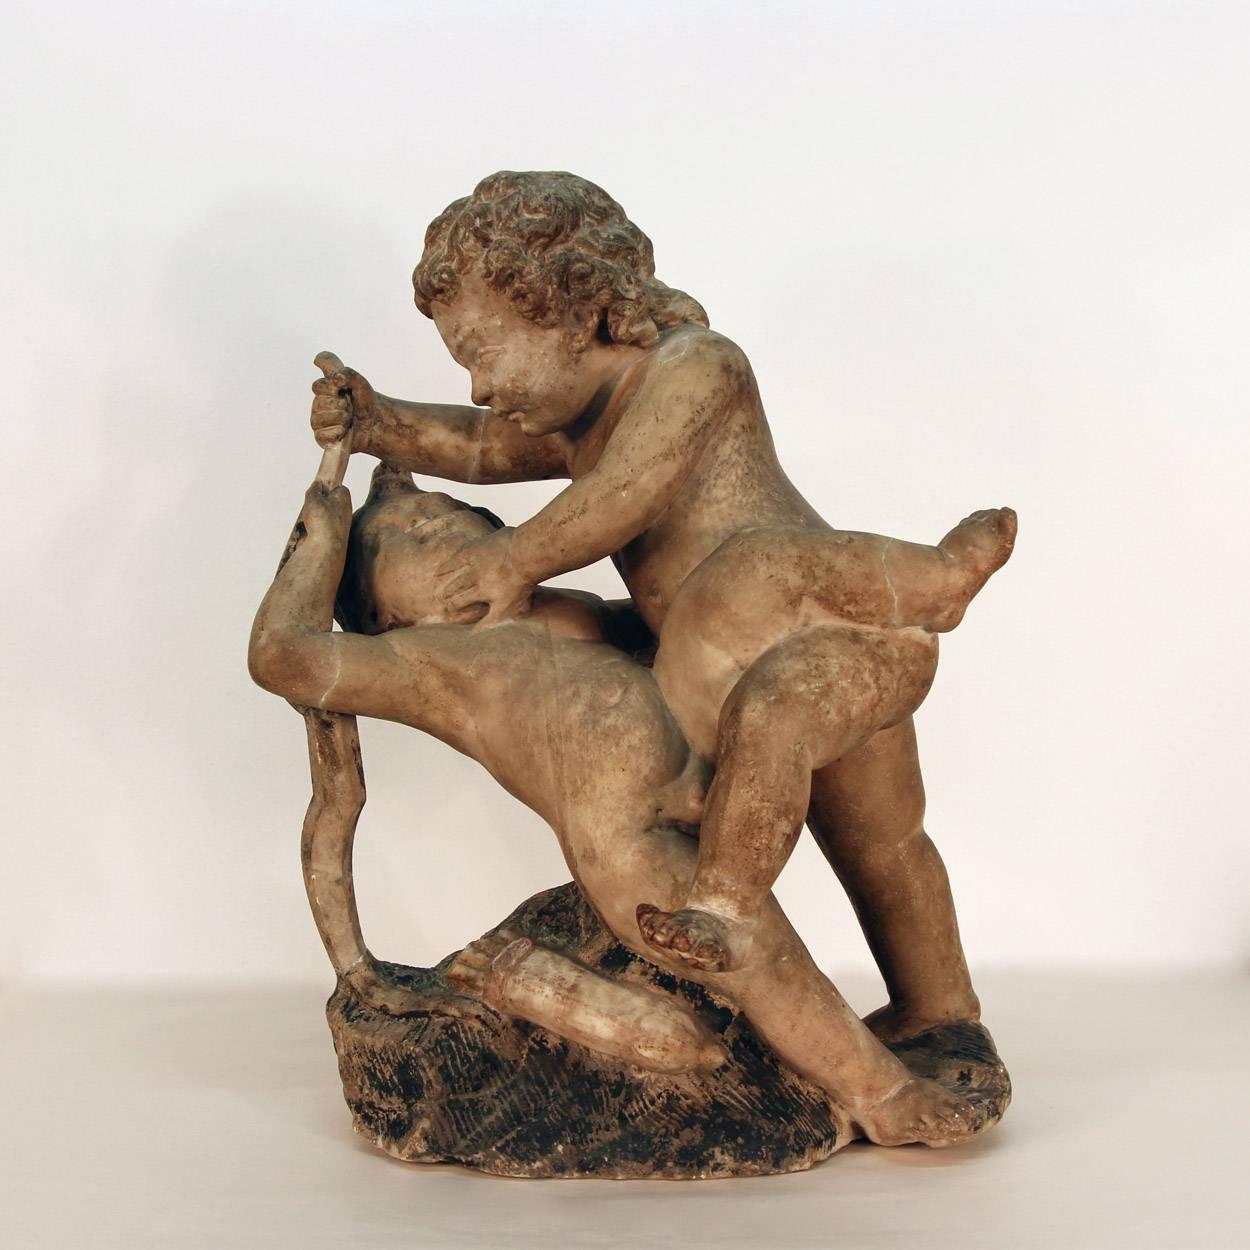 A circa 1600s sculpture of putti intertwined while at play. All hand-carved by a master artist with life like natural expressions on the cupids faces much like the examples of similar sculptures in Renaissance art.